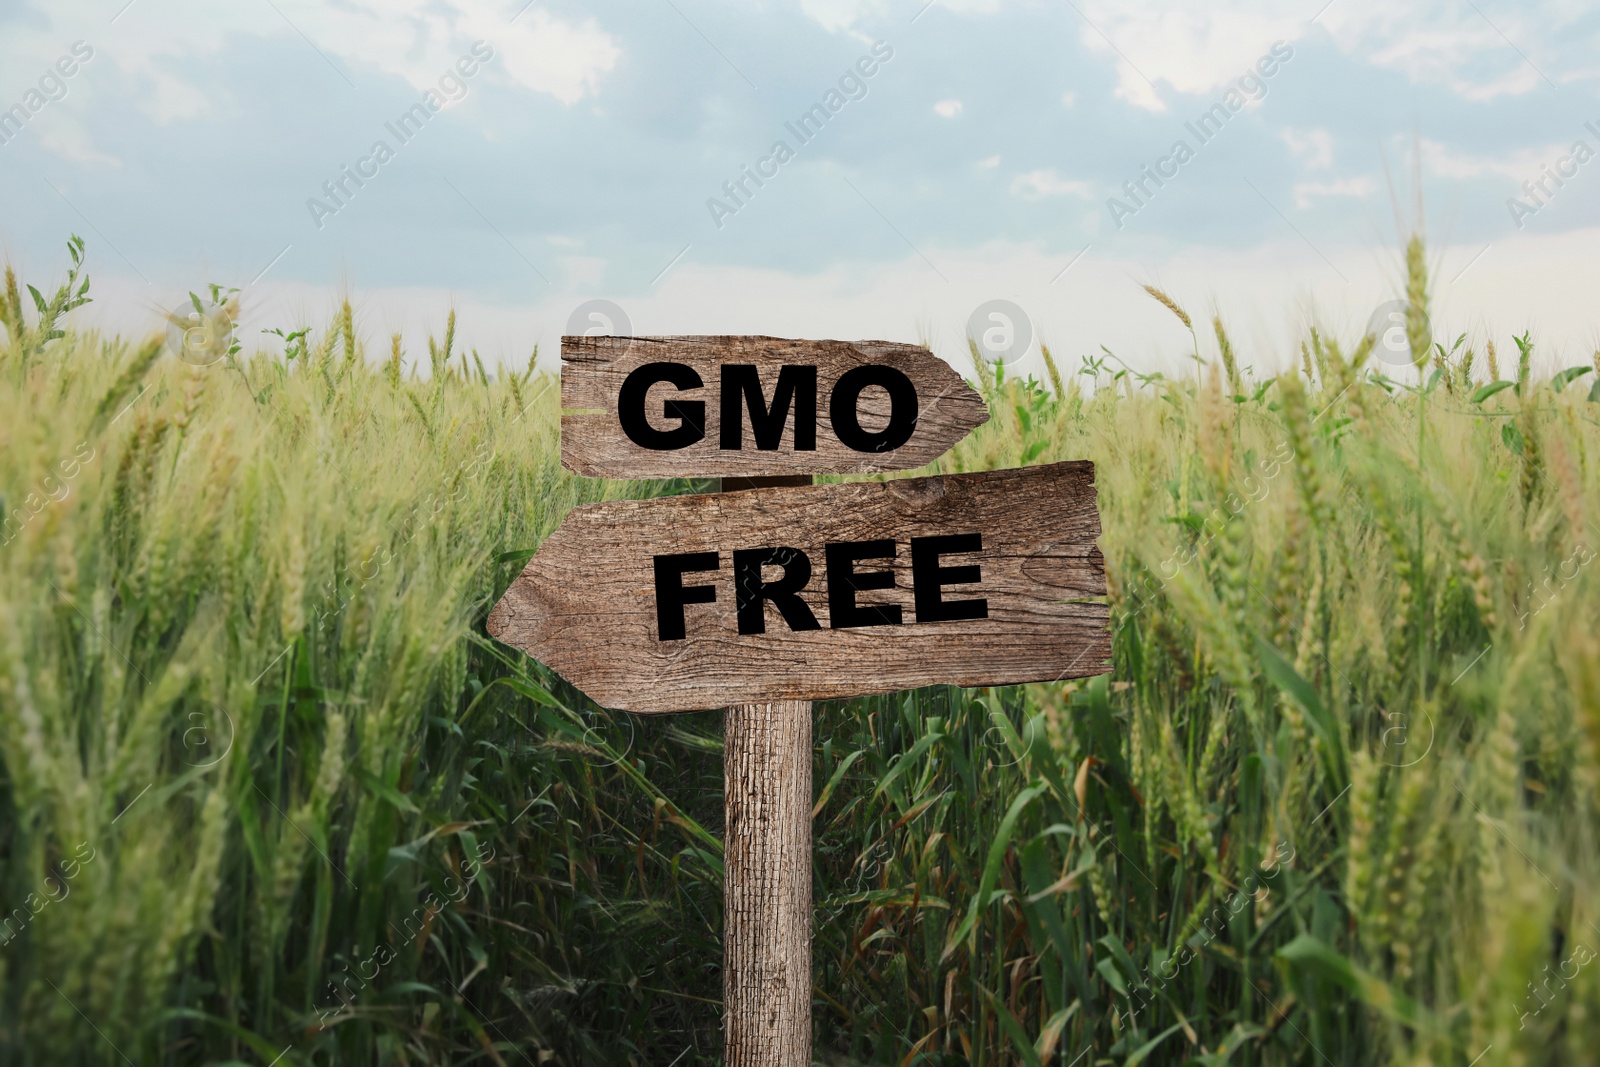 Image of Concept of GMO free harvest. Wooden sign in field with ripening wheat